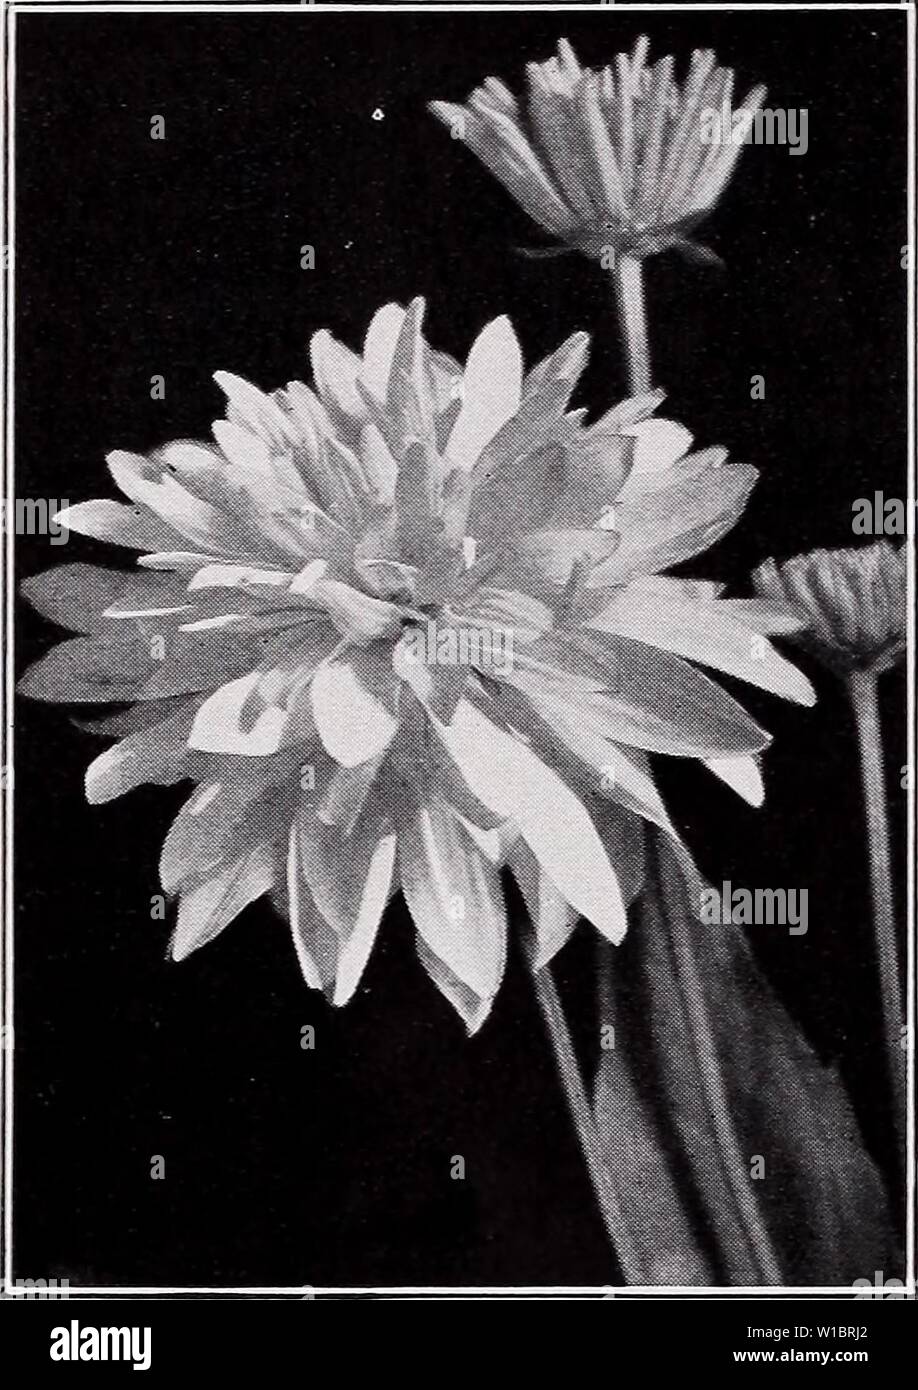 Archive image from page 45 of Descriptive price list (1935). Descriptive price list . descriptiveprice00cmho 1 Year: 1935  C. M. HOBBS 8C SONS, INC., BRIDGEPORT, INDIANA    Rudbeckia—Golden Glow. SAPONARIA ocymoides. Prostrate rockery and border plant. Great quantities of rosy pink flowers. Each, 25c; 10, $2.00; 100, $15.00. SEDUM acre. Spreading; flowers bright yel- low, foliage green. Each, 20c; 10, $1.50; 100, $13.00. S. Forsterianum. Flat-topped heads of bright yellow flowers. Each, 25c; 10, $2.00; 100, $15.00. S. glaucum. Excellent dwarf variety with blu- ish foliage. Each, 25c; 10, $2.00 Stock Photo